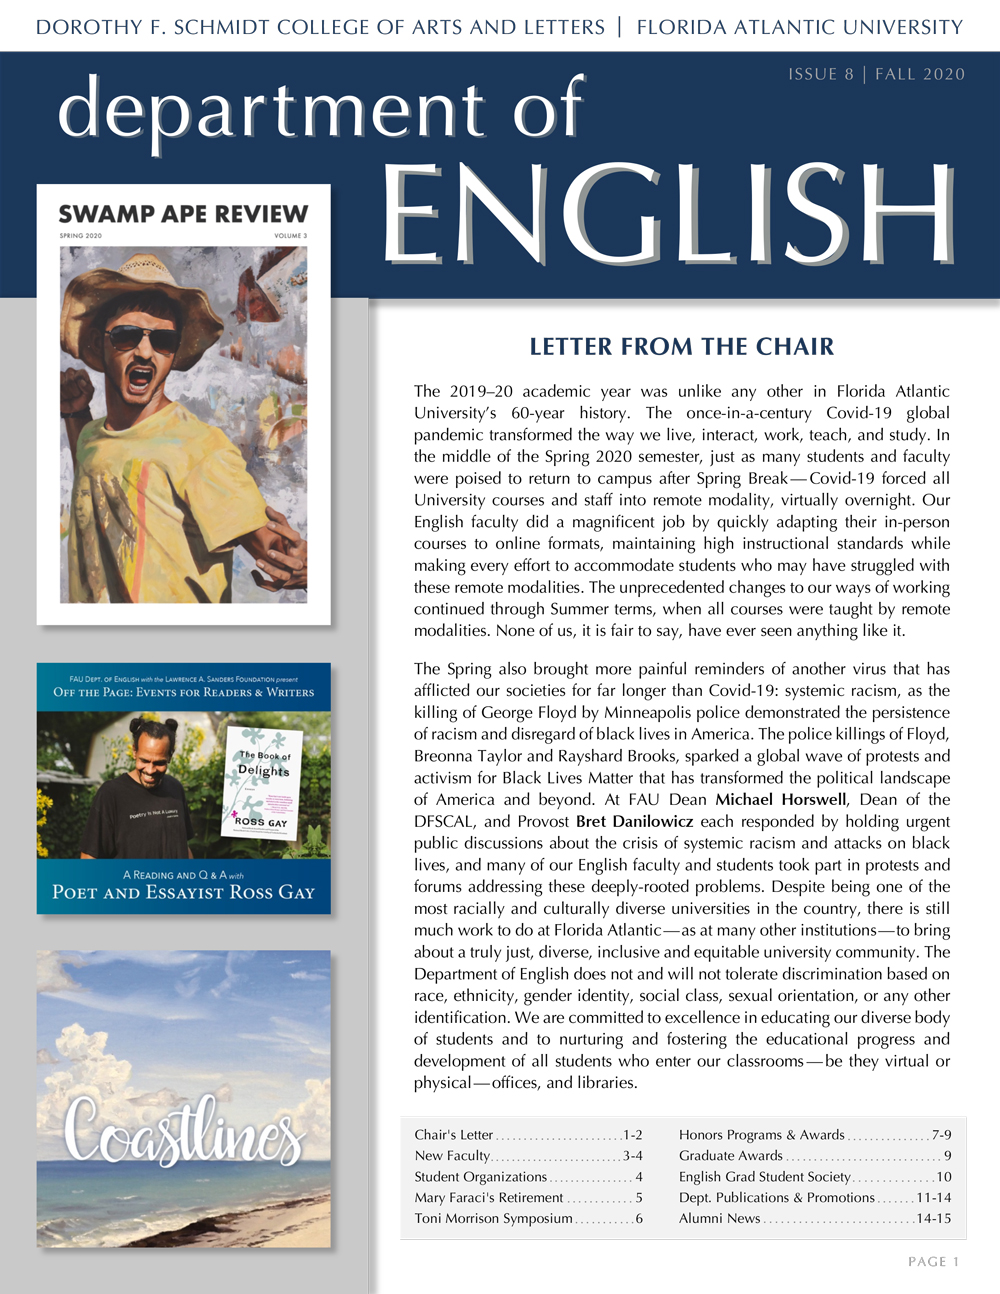 fall 2020 english department newsletter cover